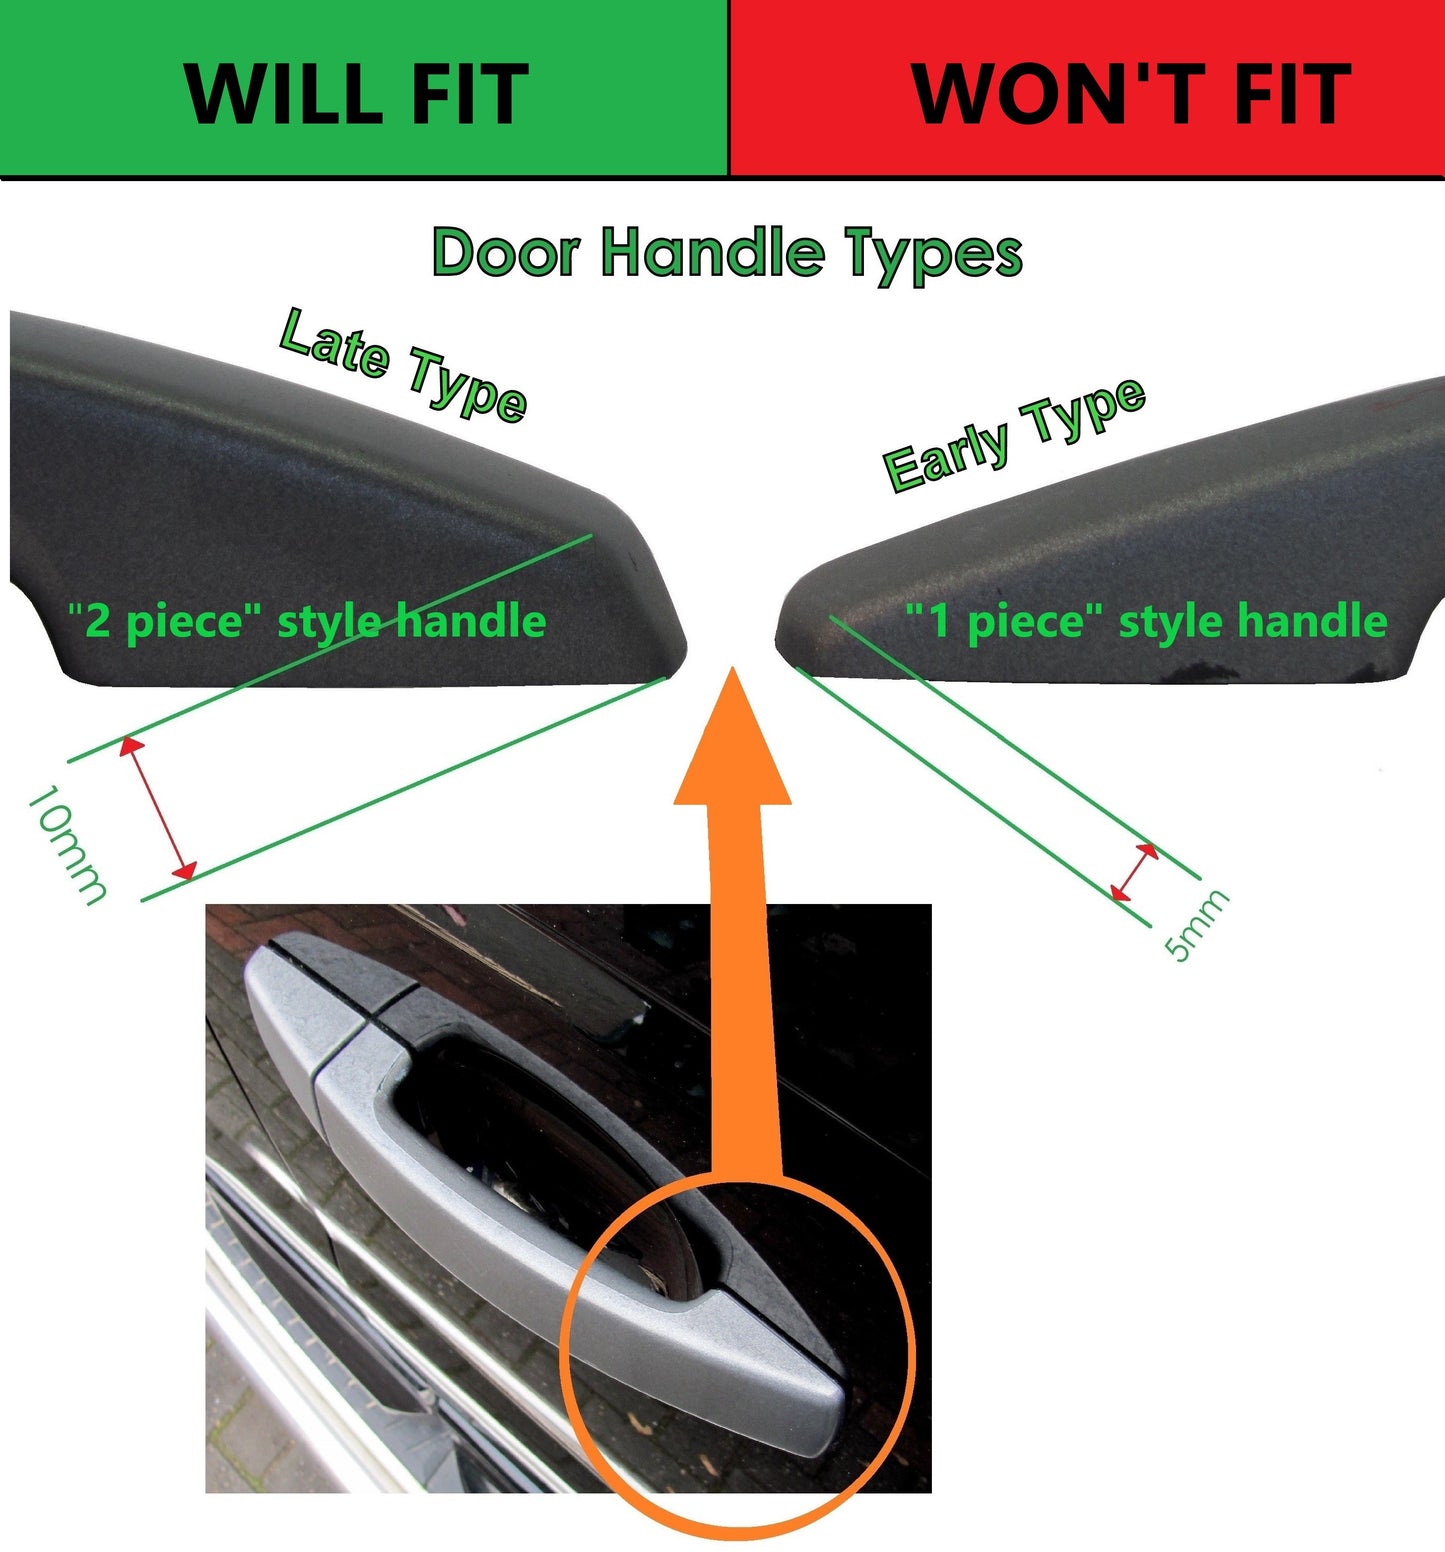 Door Handle "Skins" for Land Rover Discovery 3 fitted with 2 pc Handle - Stornoway Grey